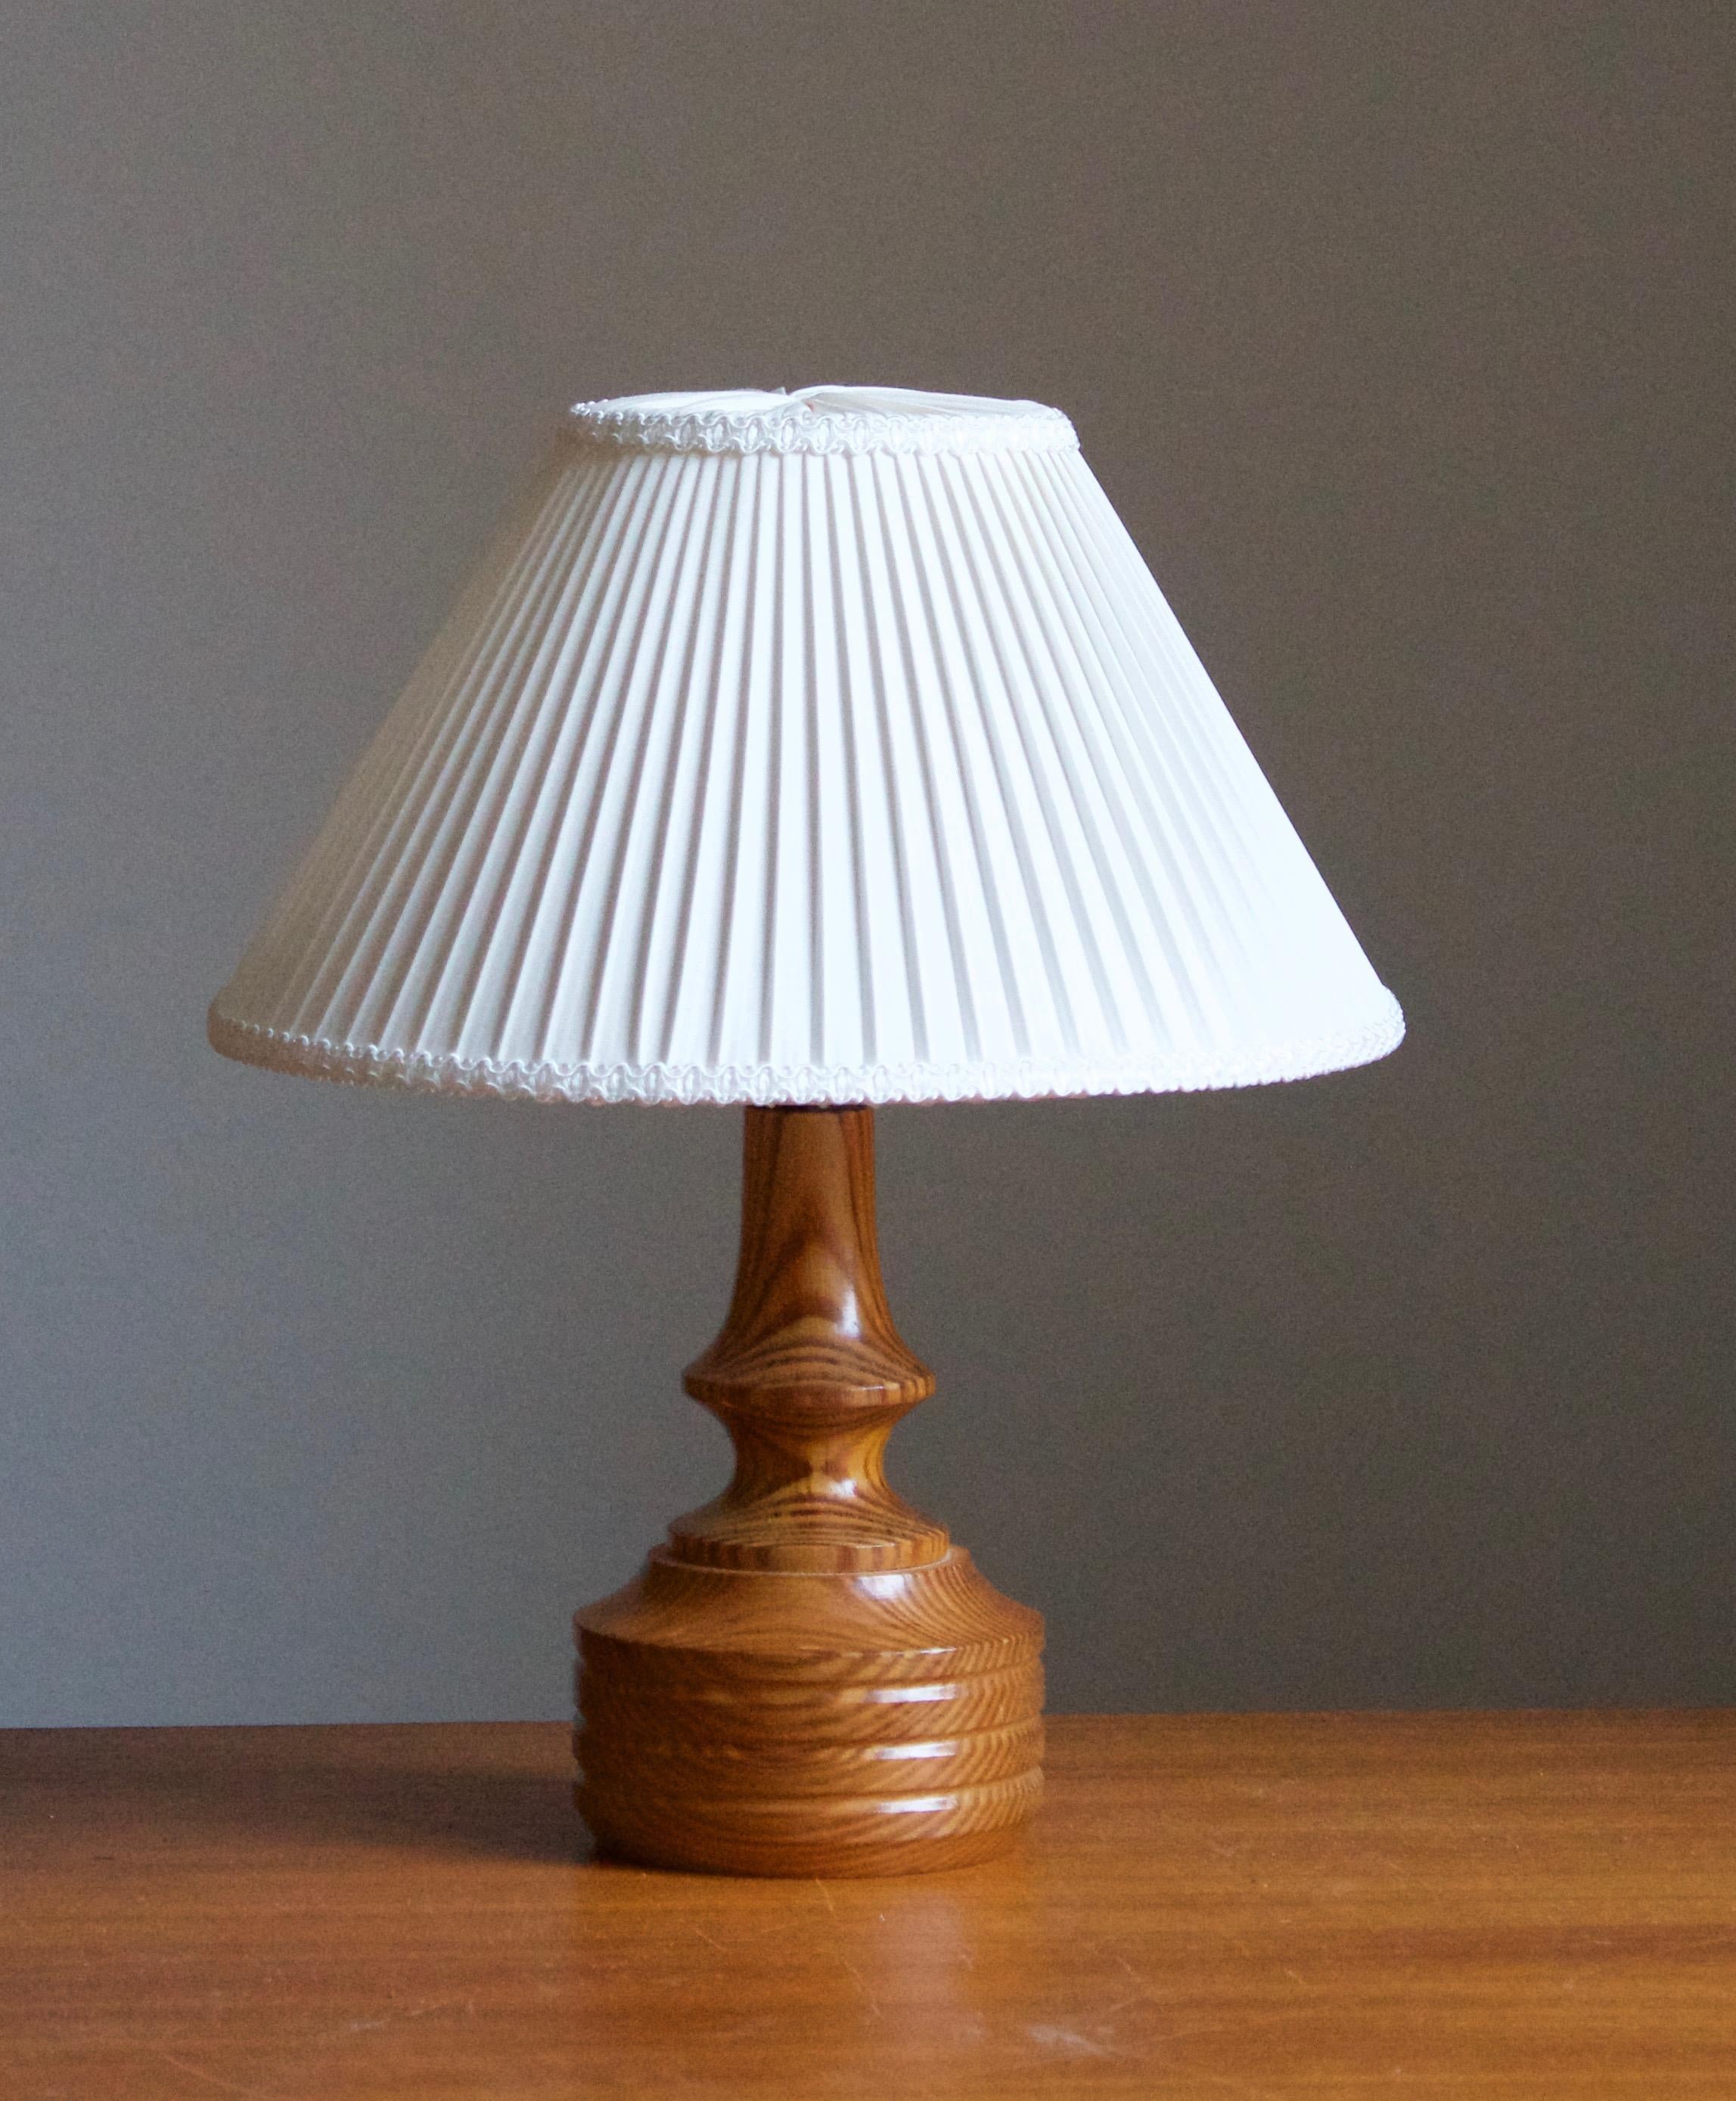 A small pine table lamp, designed and produced in Sweden, c. 1970s. 

Stated dimensions exclude lampshade. Height includes socket. Sold without lampshade.